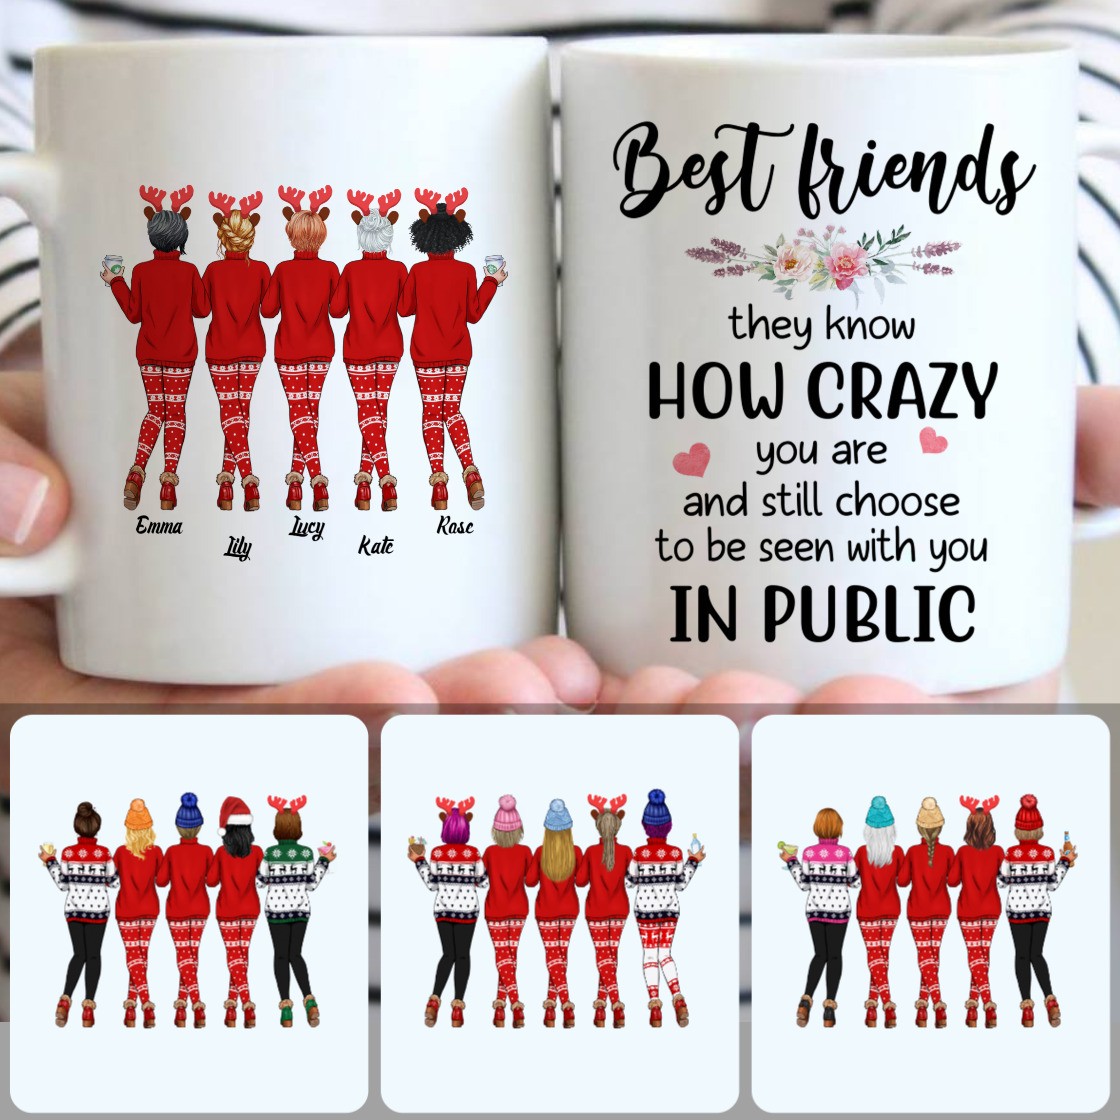 Personalized Mug, Perfect Christmas Gifts, 5 Best Friends Customized Coffee Mug With Names